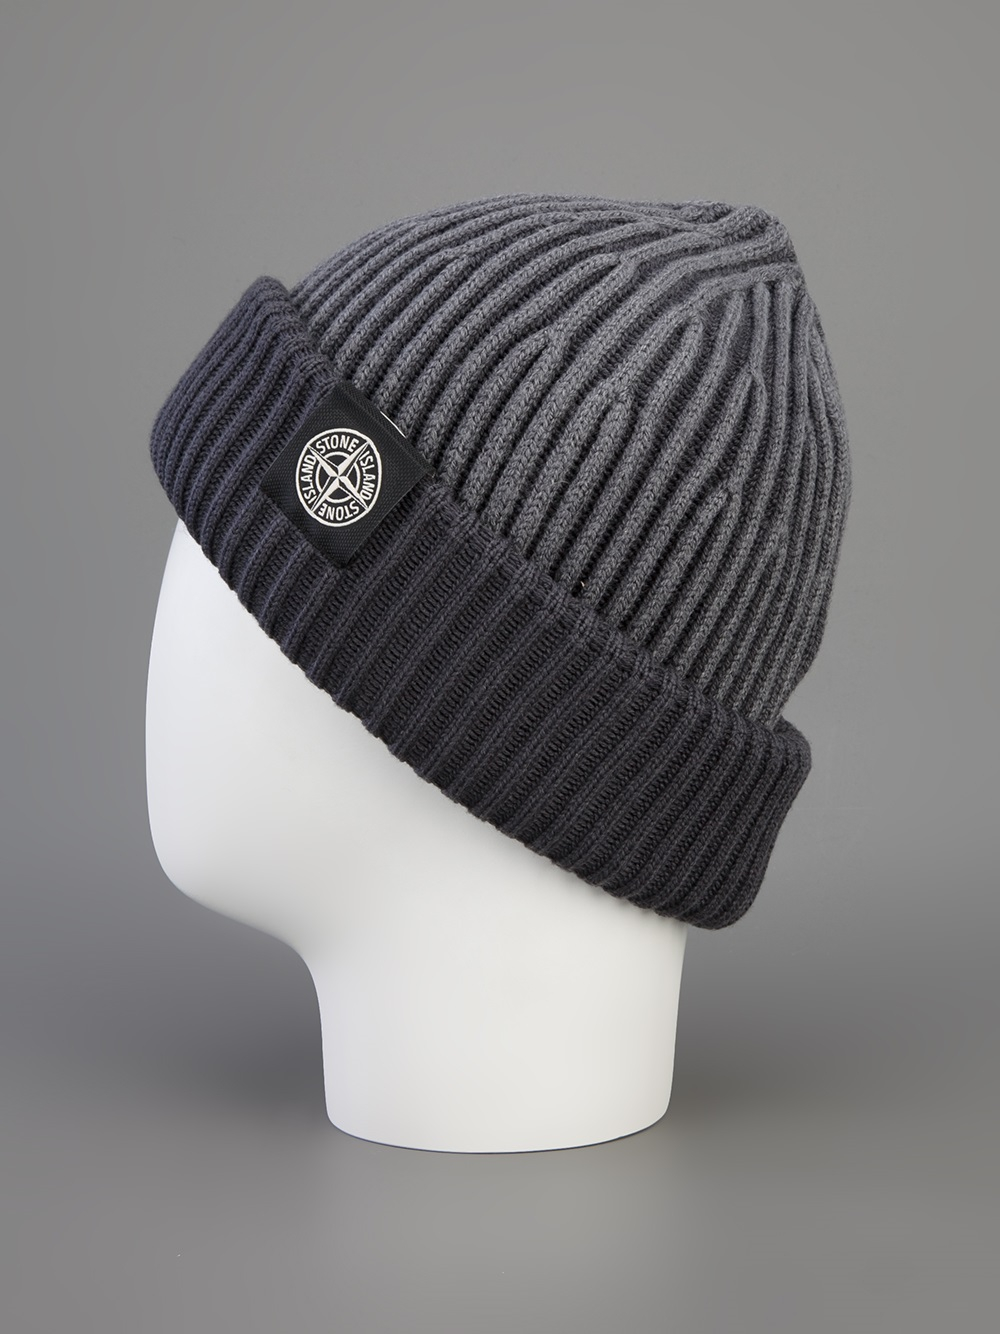 Stone Island Ribbed Beanie in Grey (Gray) for Men - Lyst